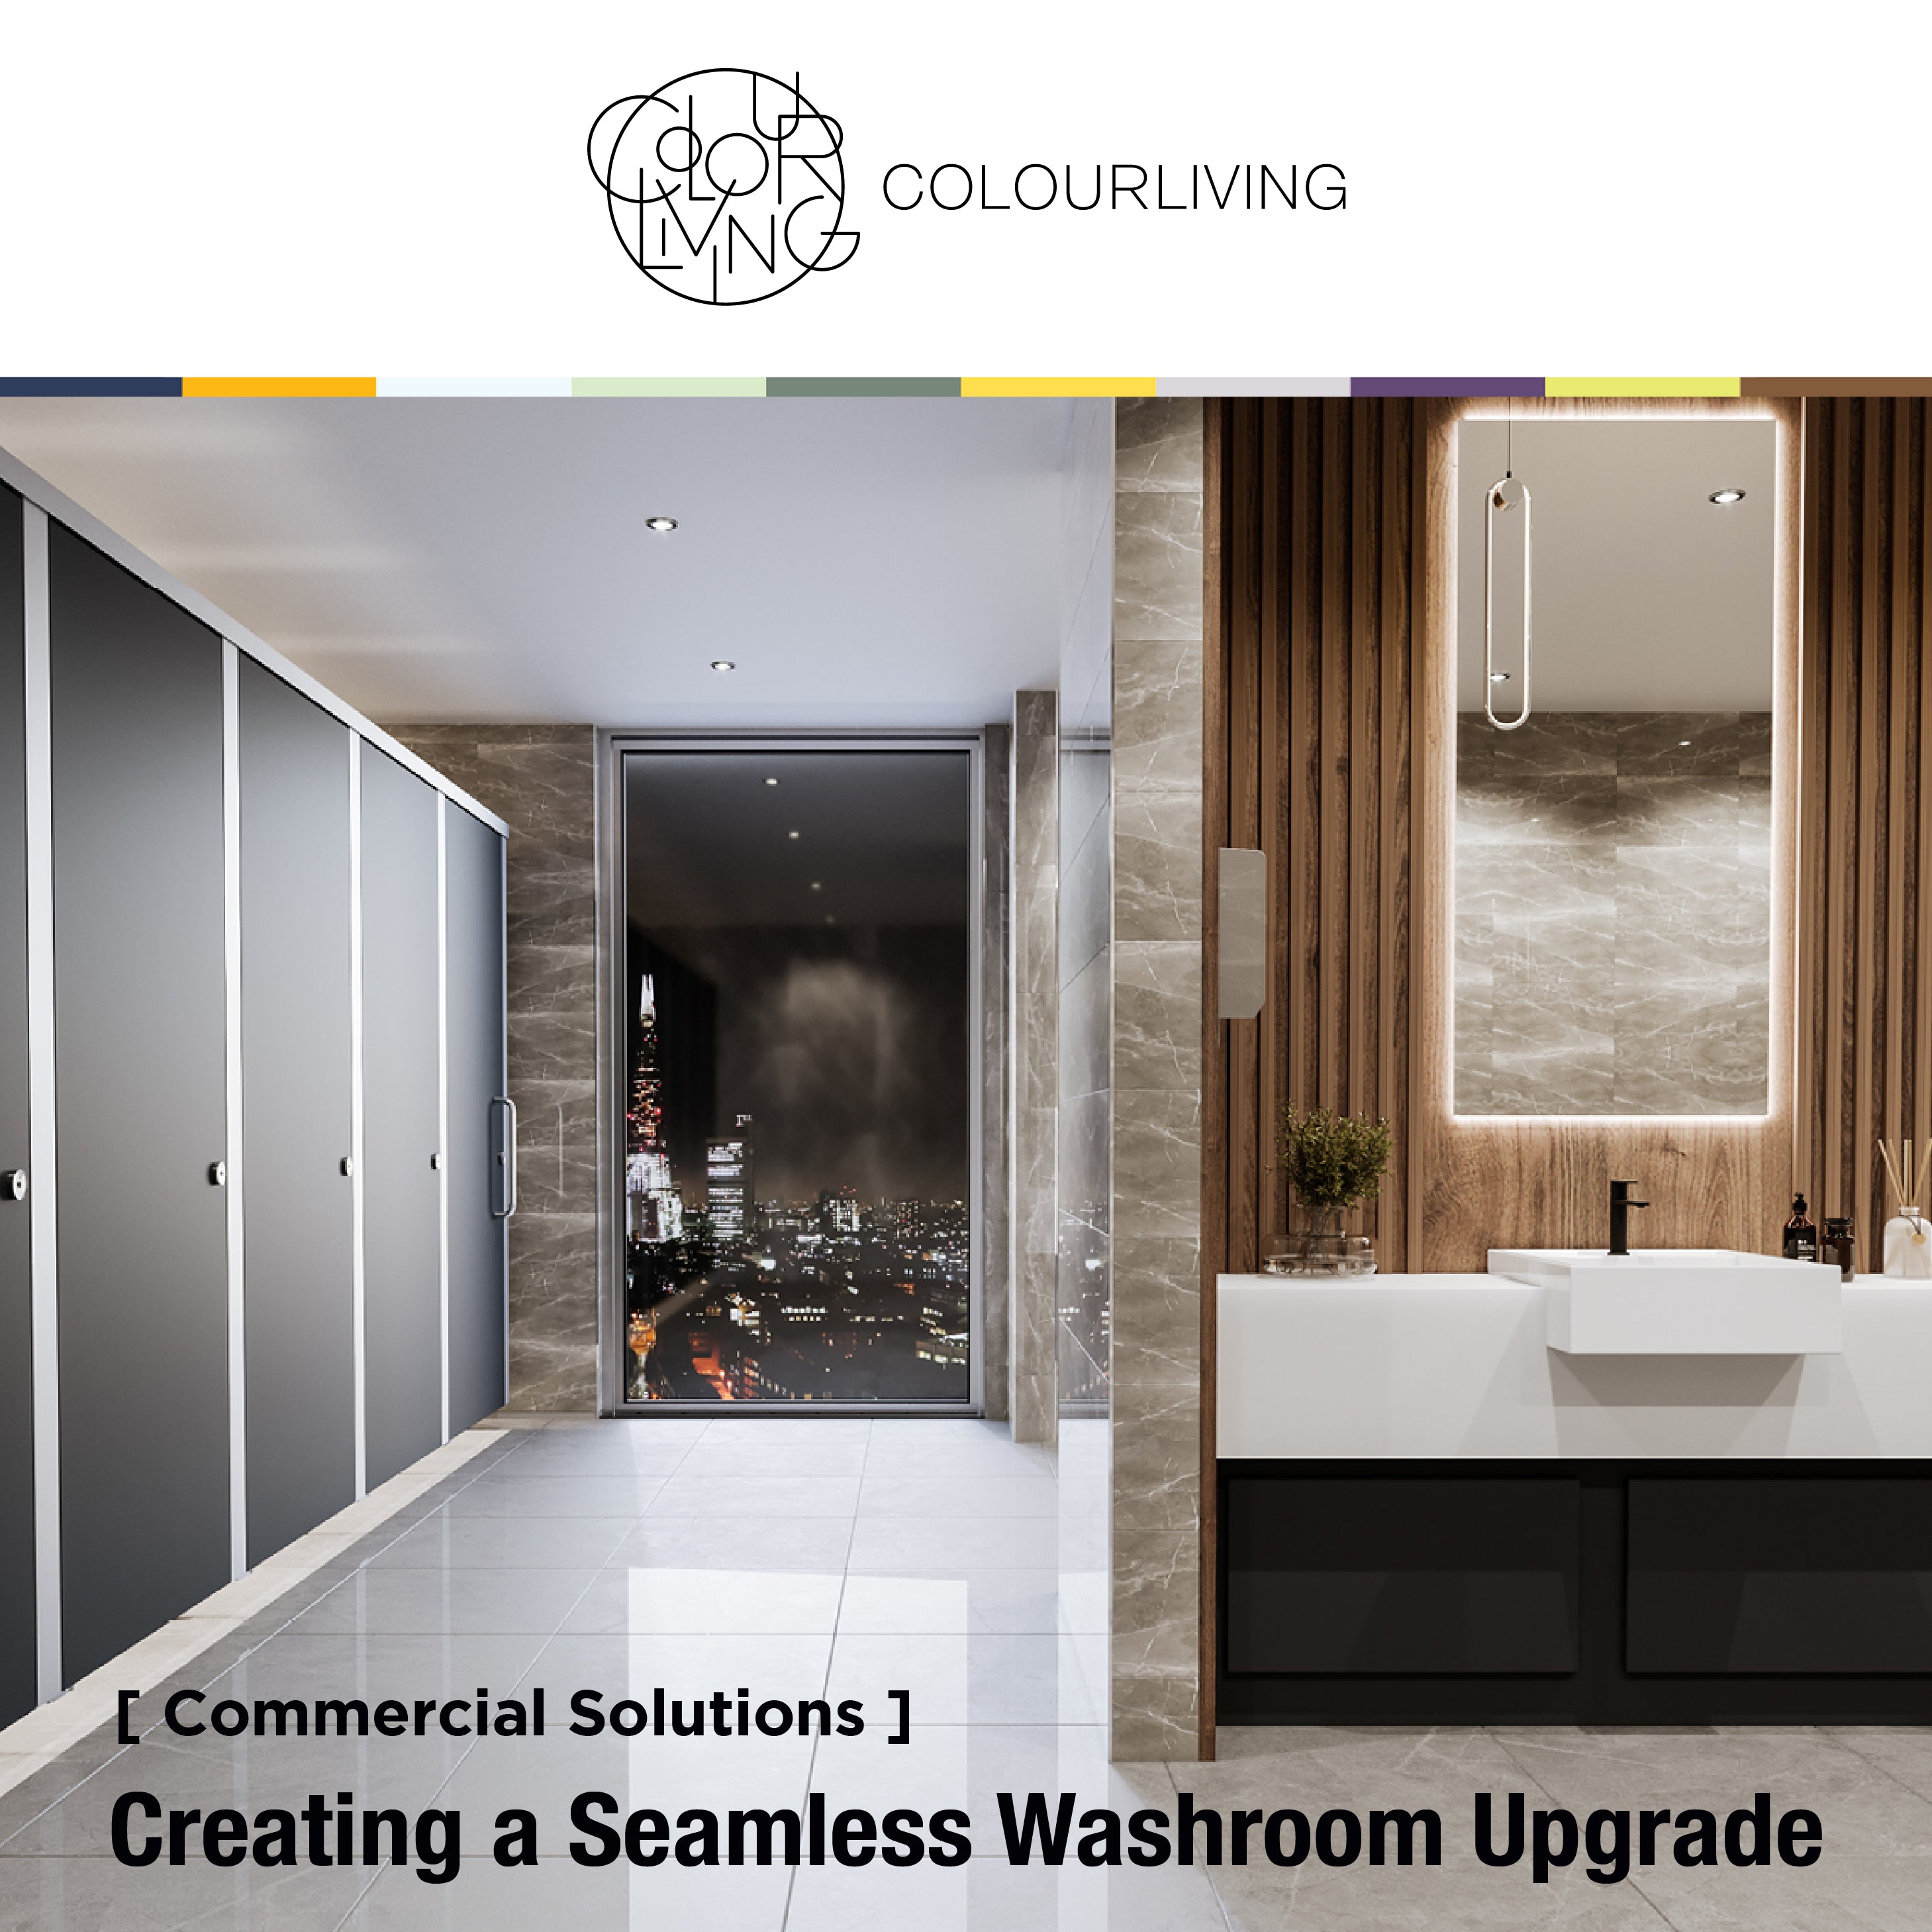 COLOURLIVING | COMMERCIAL SOLUTIONS | CREATING A SEAMLESS WASHROOM UPGRADE